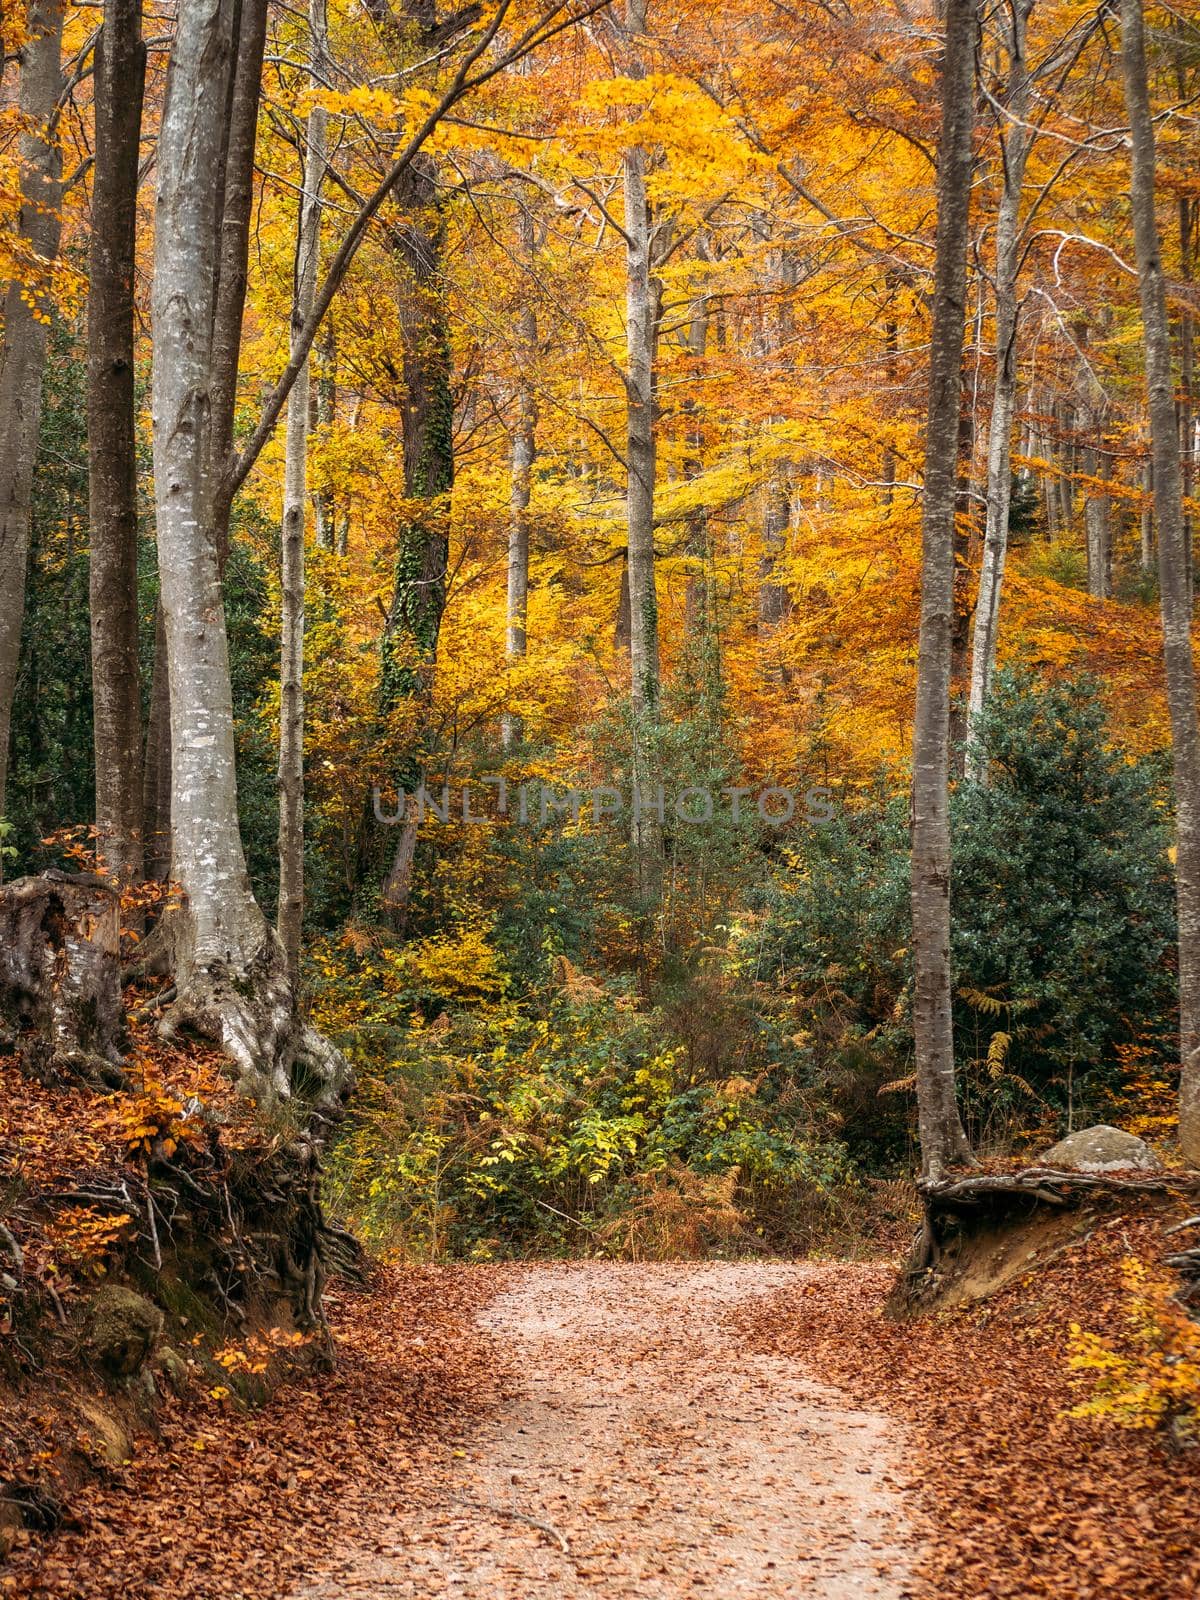 Pathway through the autumn forest.